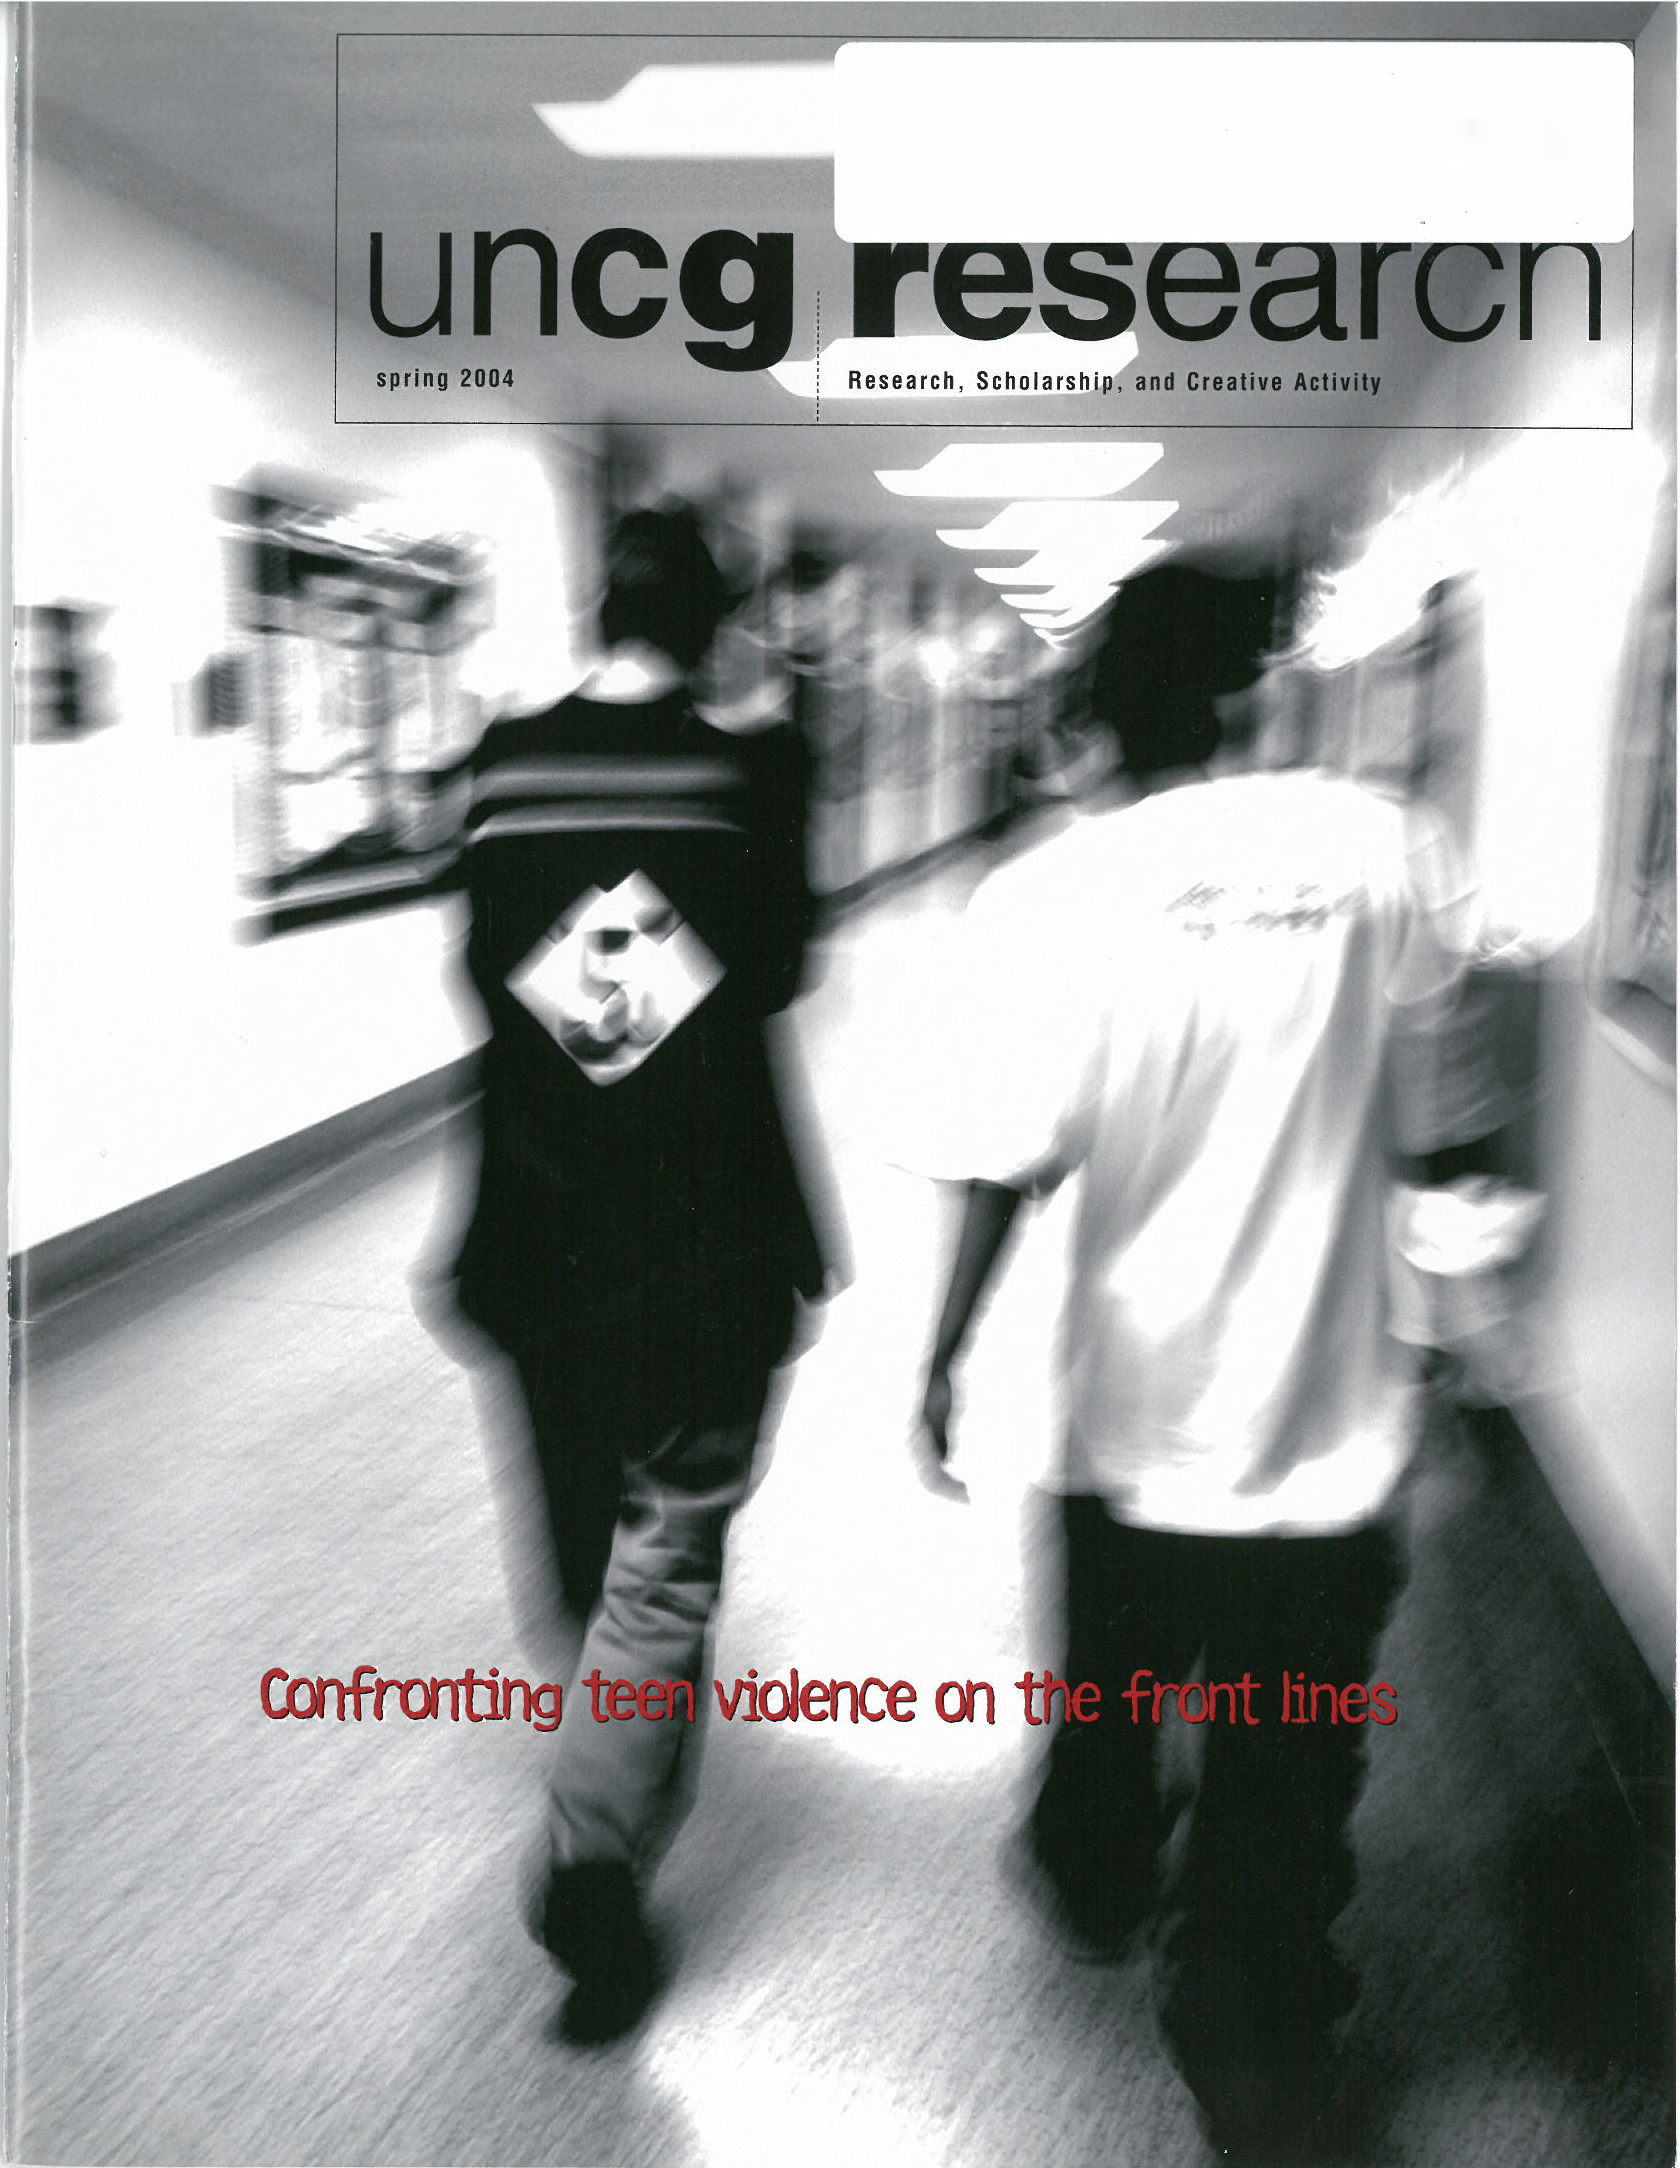 Cover of UNCG's Spring 2004 Research Magazine